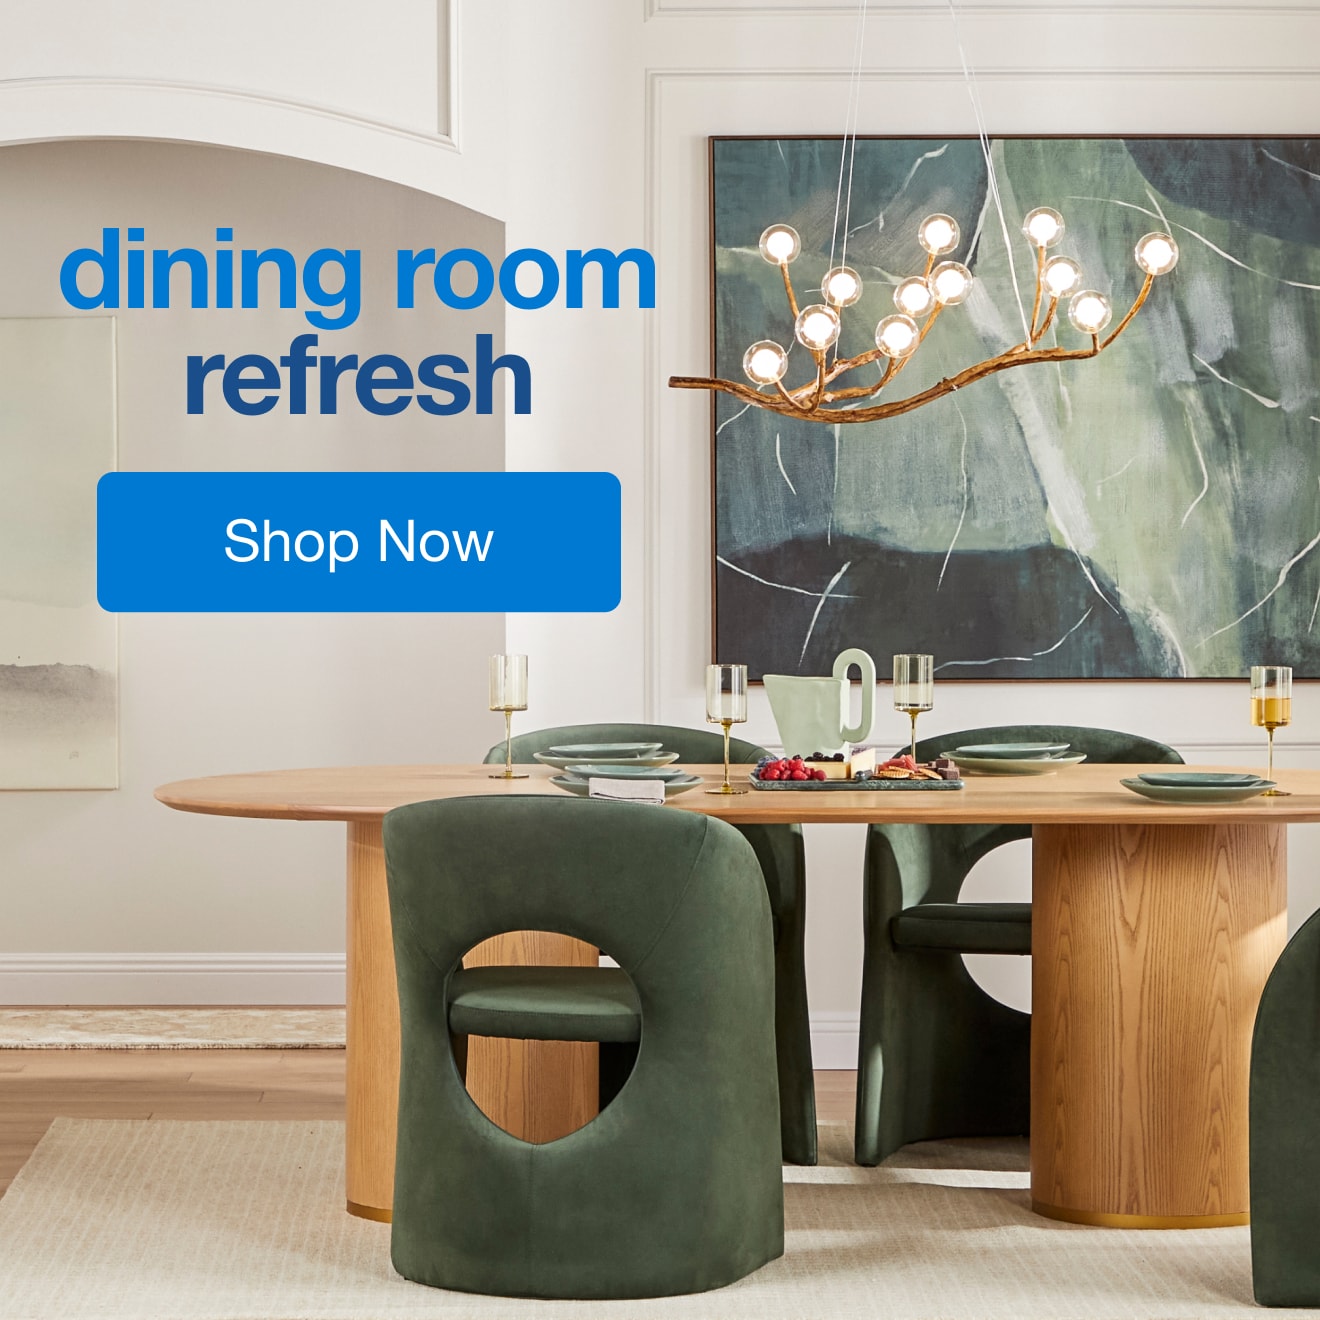 New Arrivals in Dining Room - Shop Now!